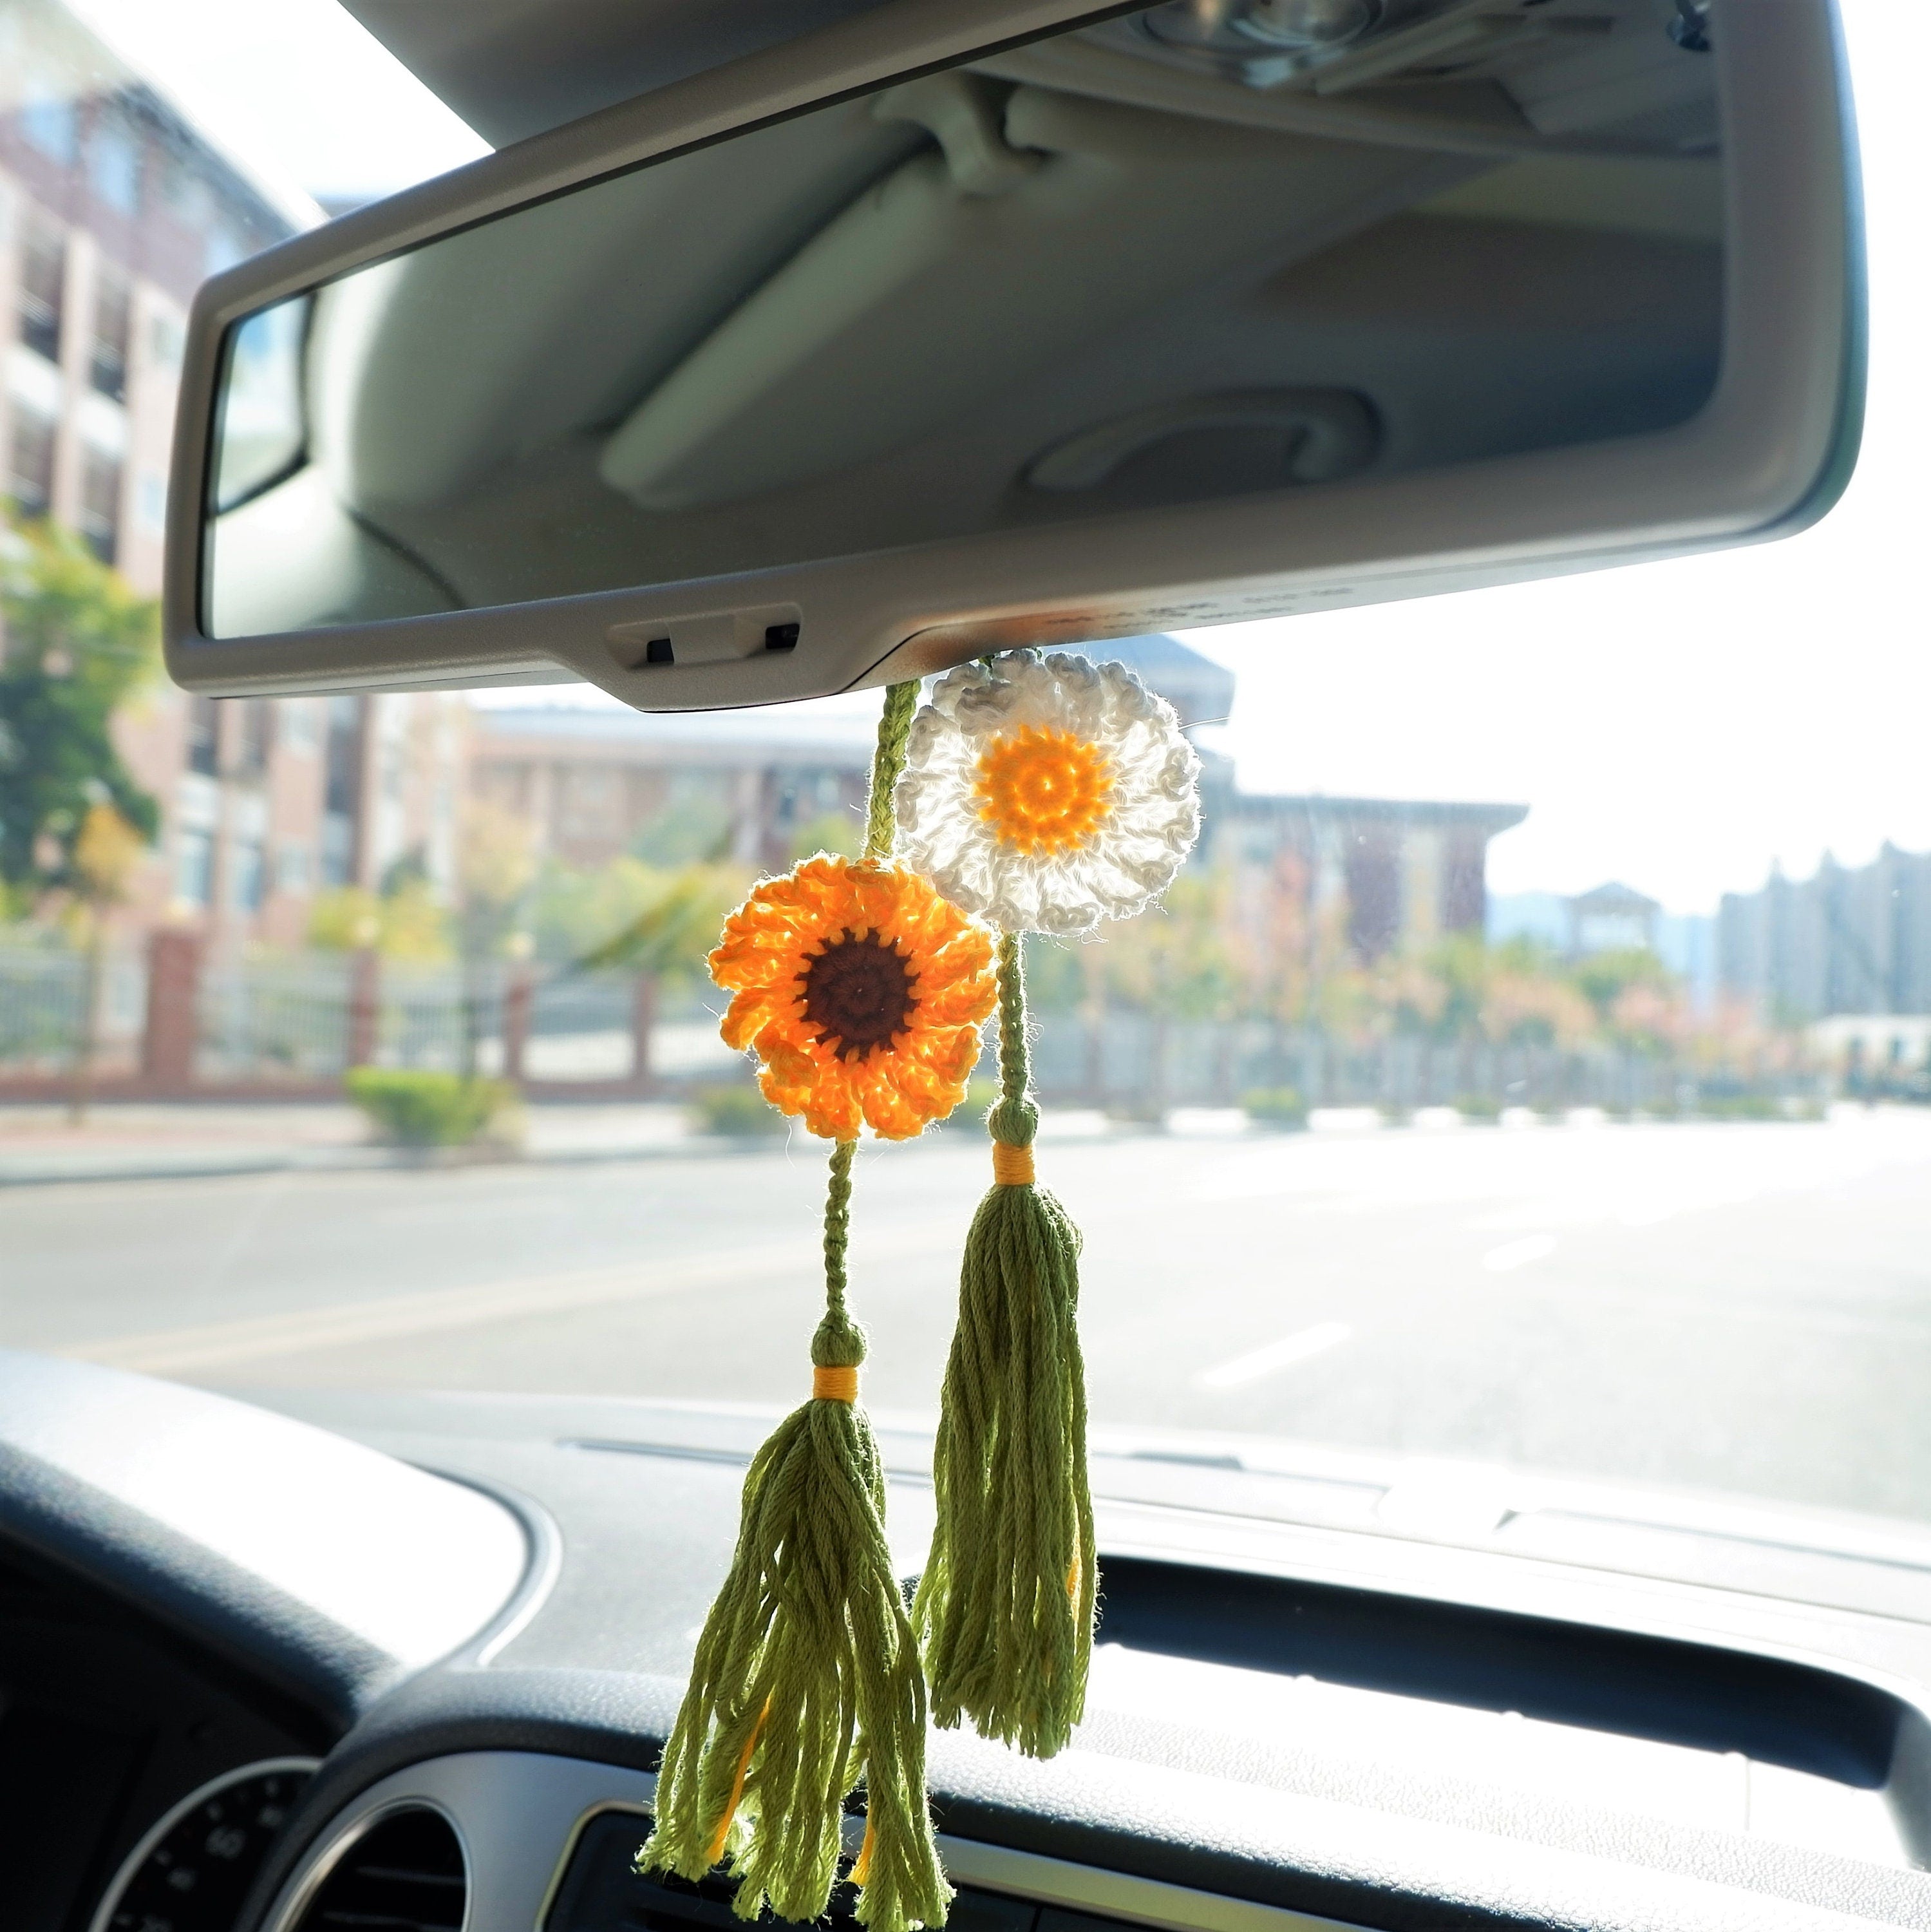 Akitai Elegant Cross and The Throughout Charm, Colors Sunlight Energy  Catcher Mirror Car and Mirror Diffuses Rearview Transforms Sun for Car並行輸入  通販